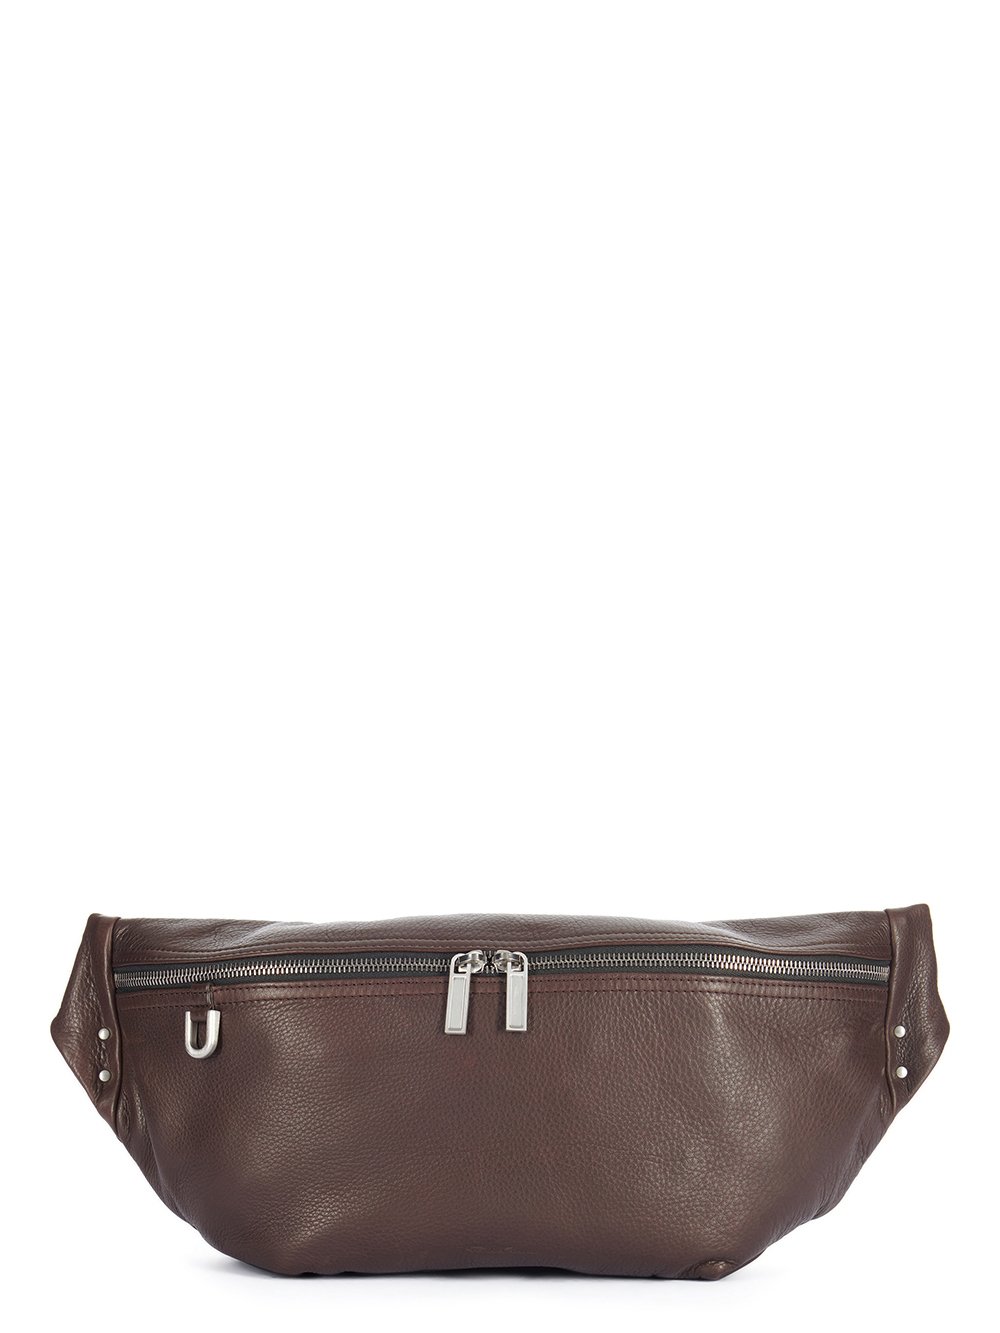 RICK OWENS FW23 LUXOR BUMBAG IN BROWN SOFT GRAIN COW LEATHER